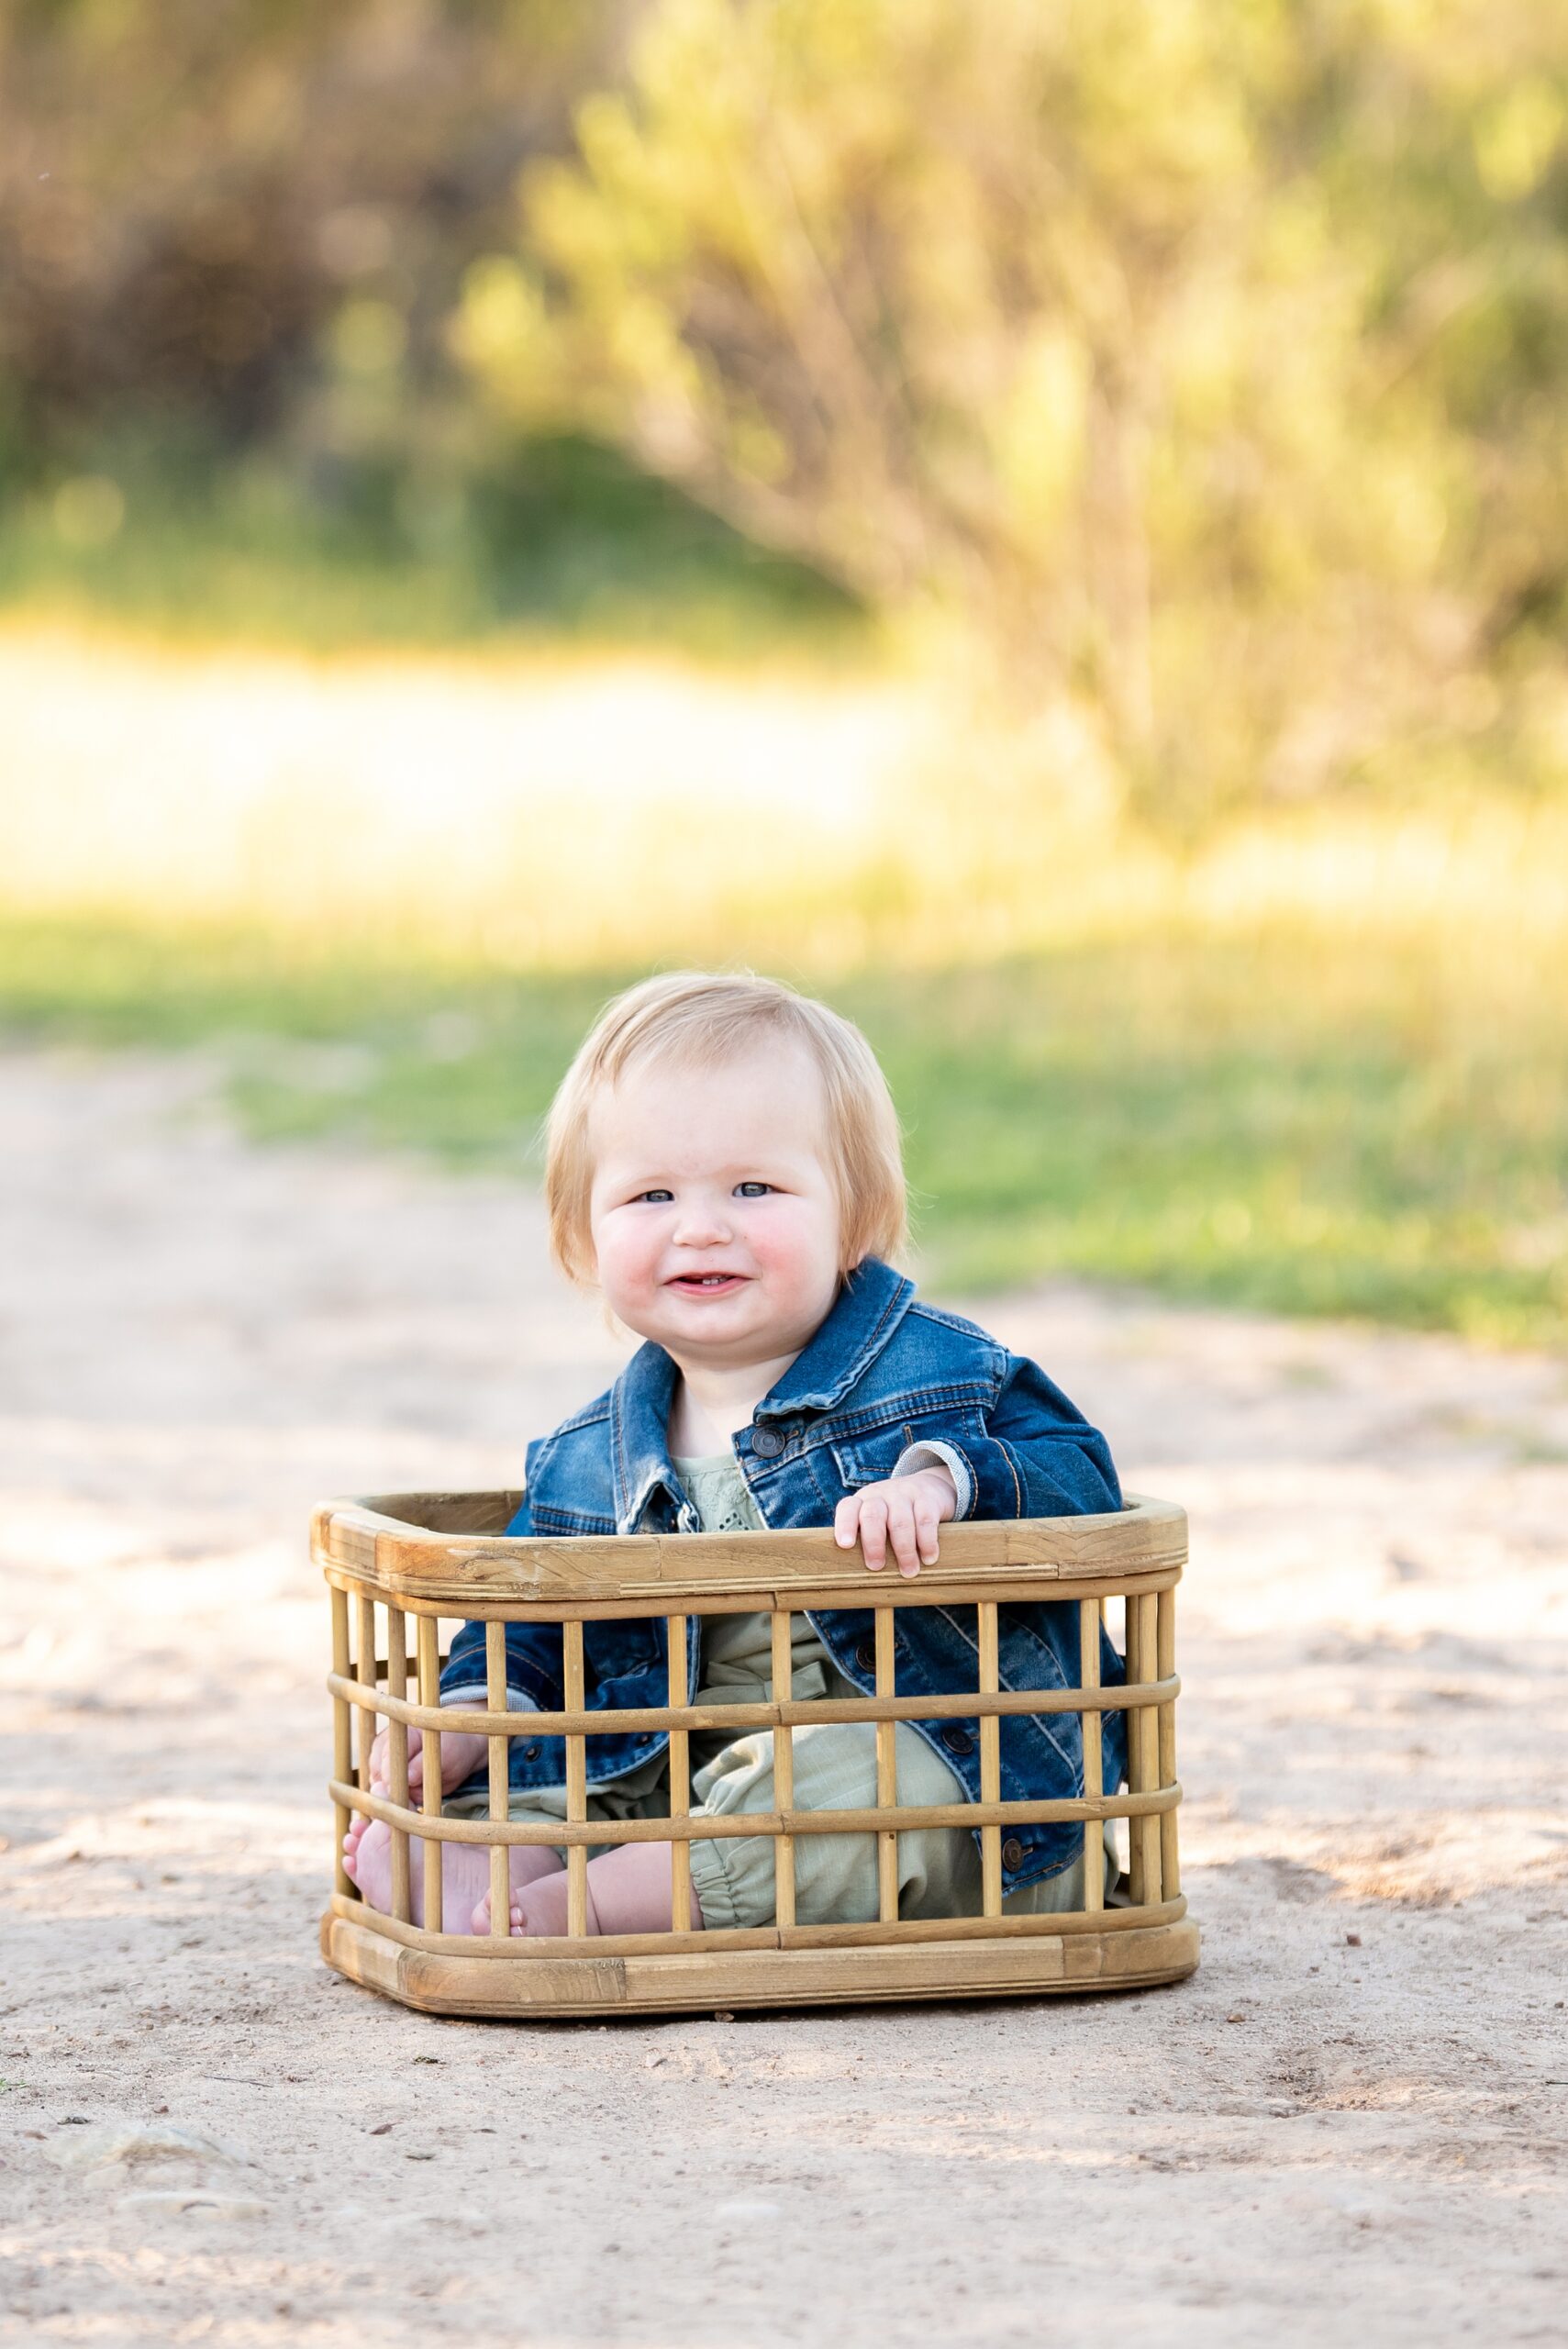 A young toddler smiles while sitting in a wooden basket in a park